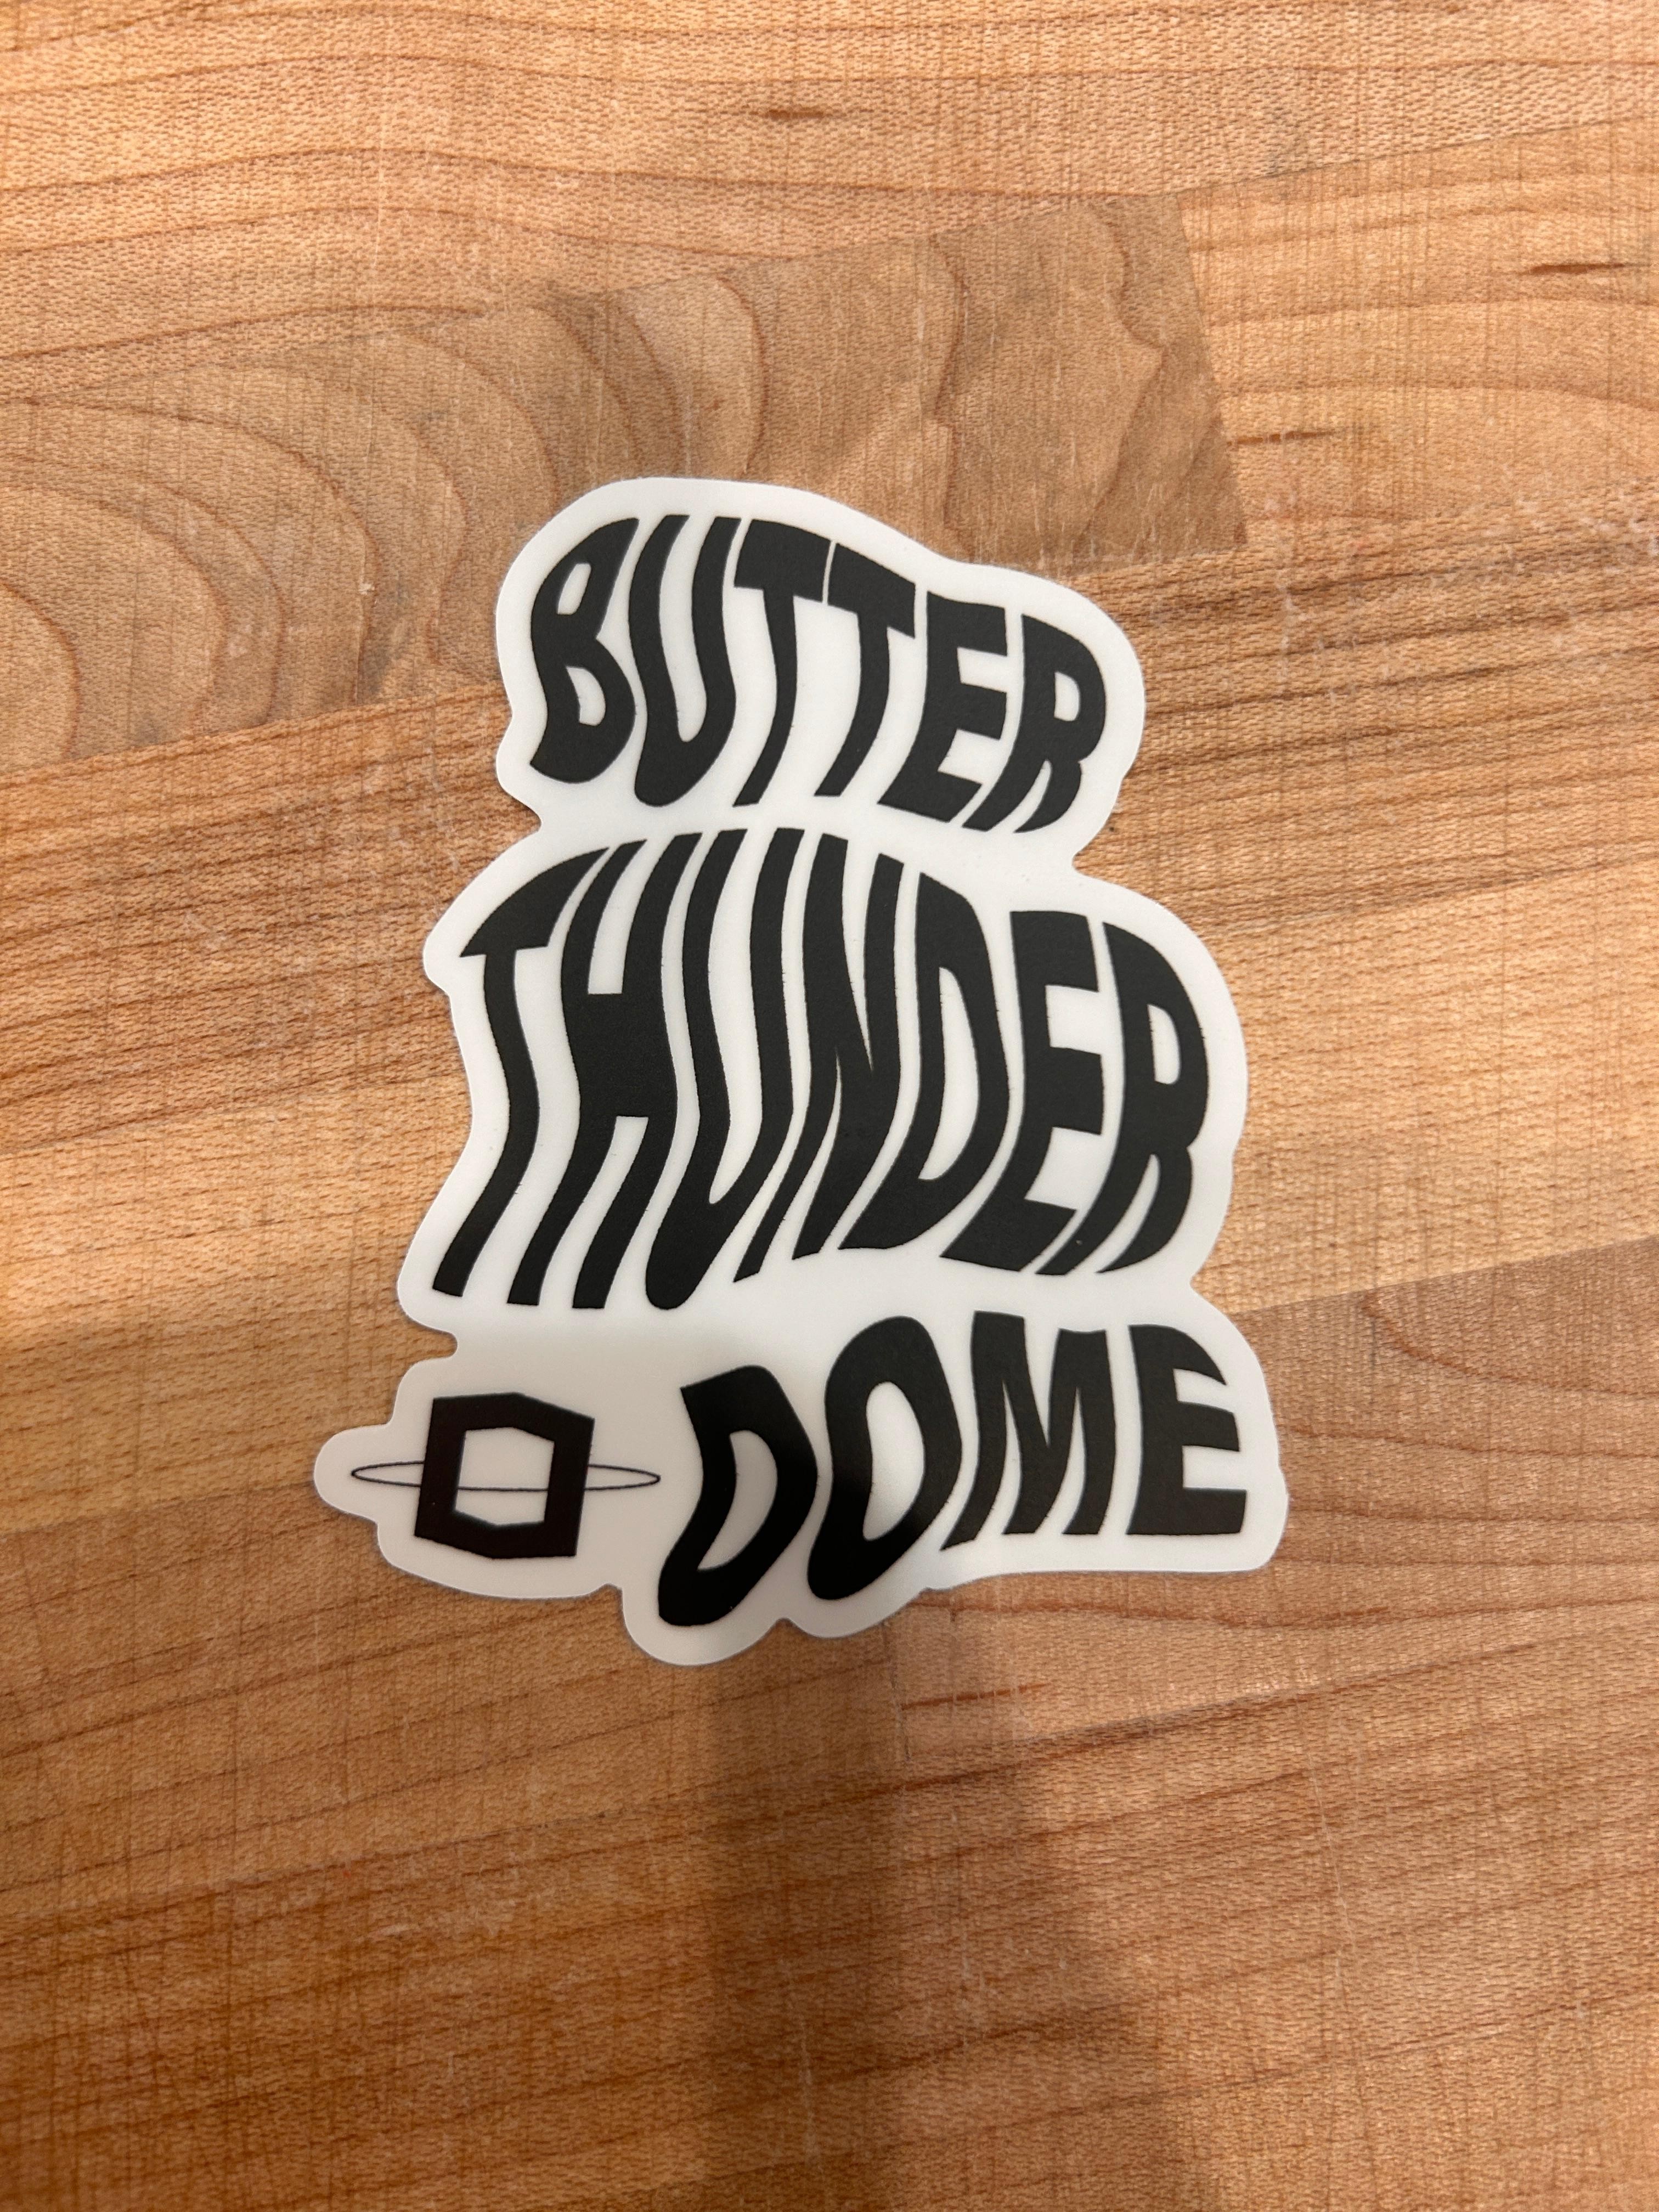 Butter thunder dome